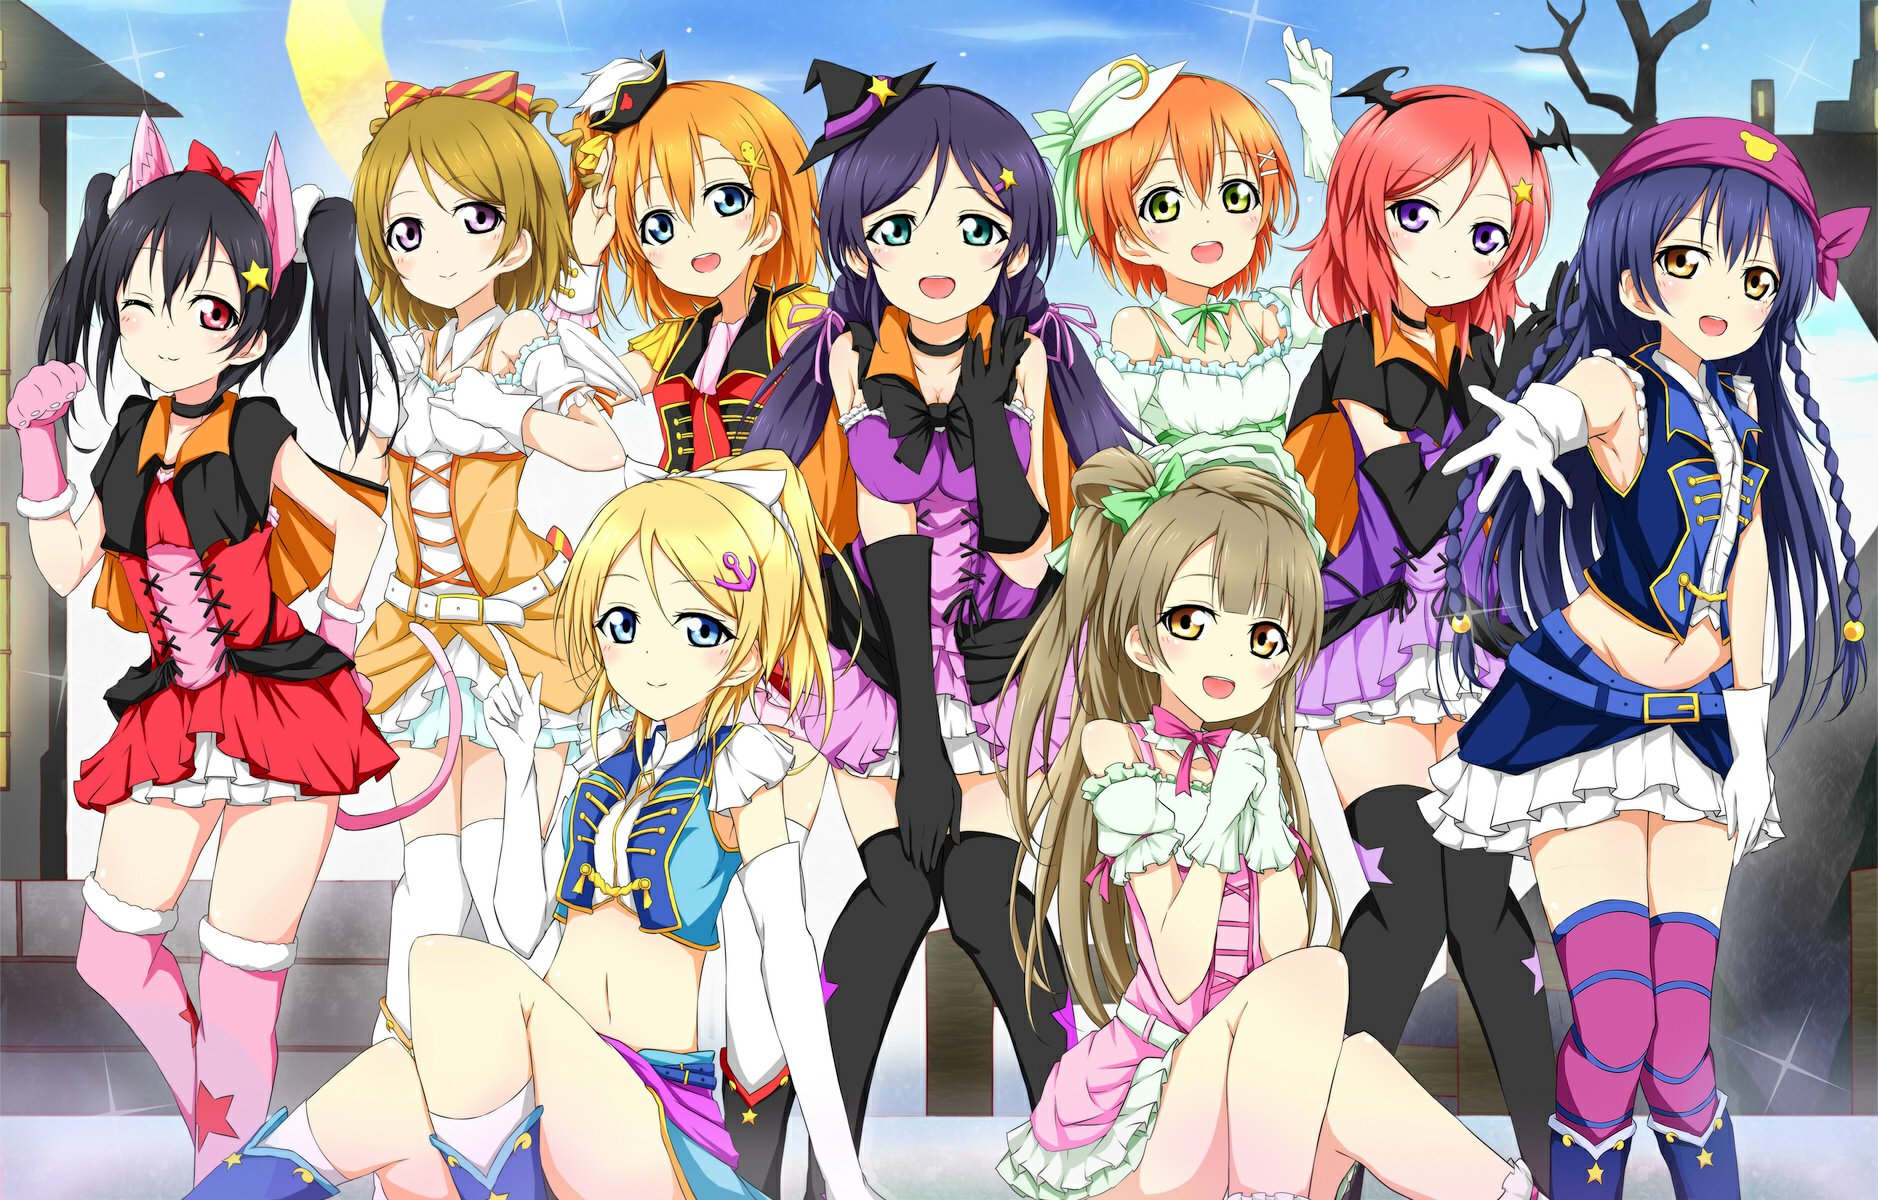 830 Love Live Hd Wallpapers Background Images Wallpaper Abyss